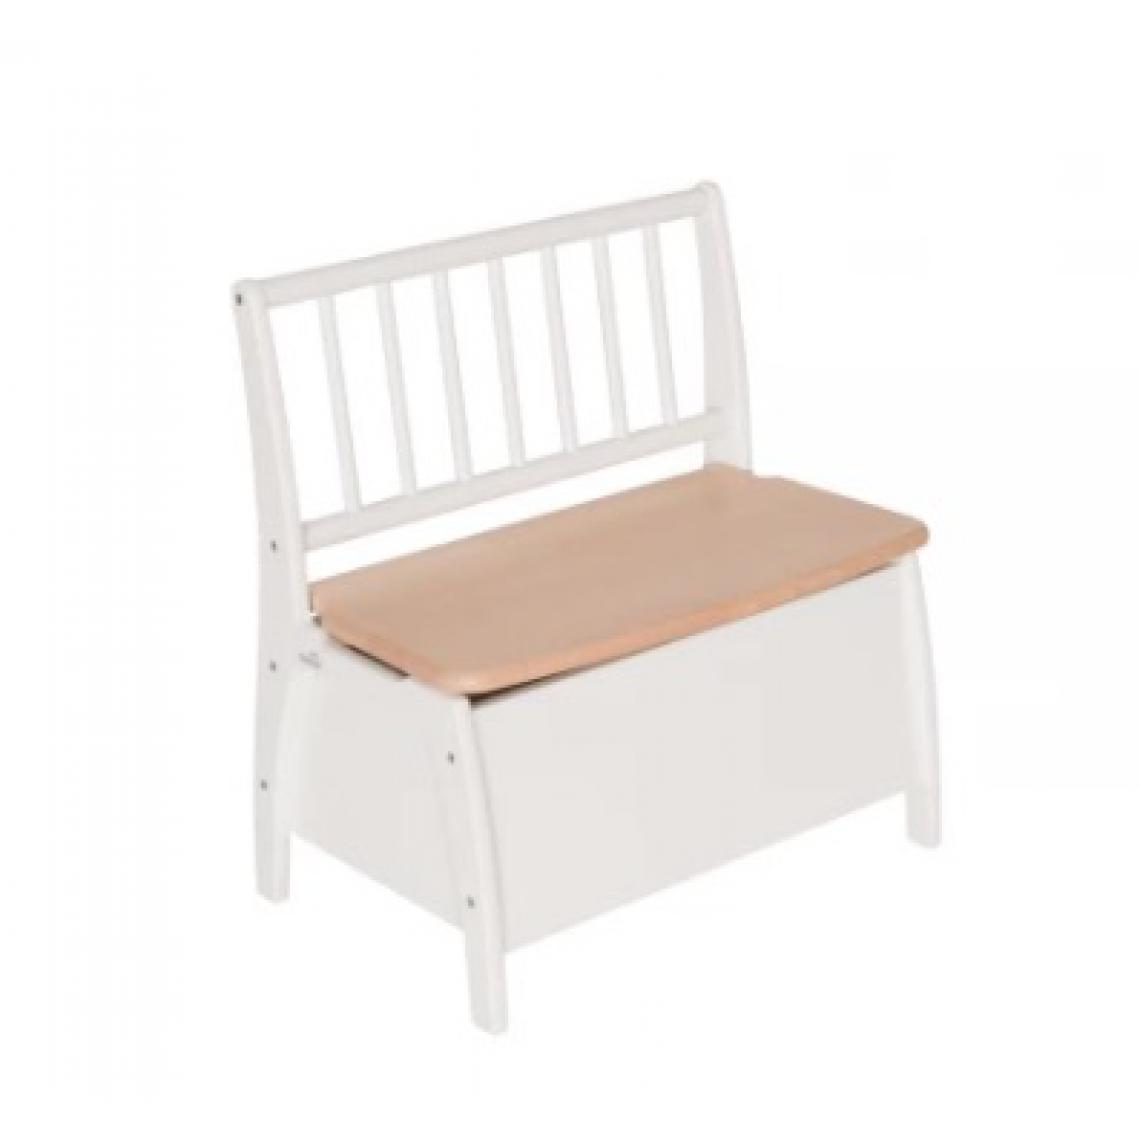 Geuther - Geuther Banc Coffre bois BAMBINO Couleur Blanc Naturel - Malles, coffres